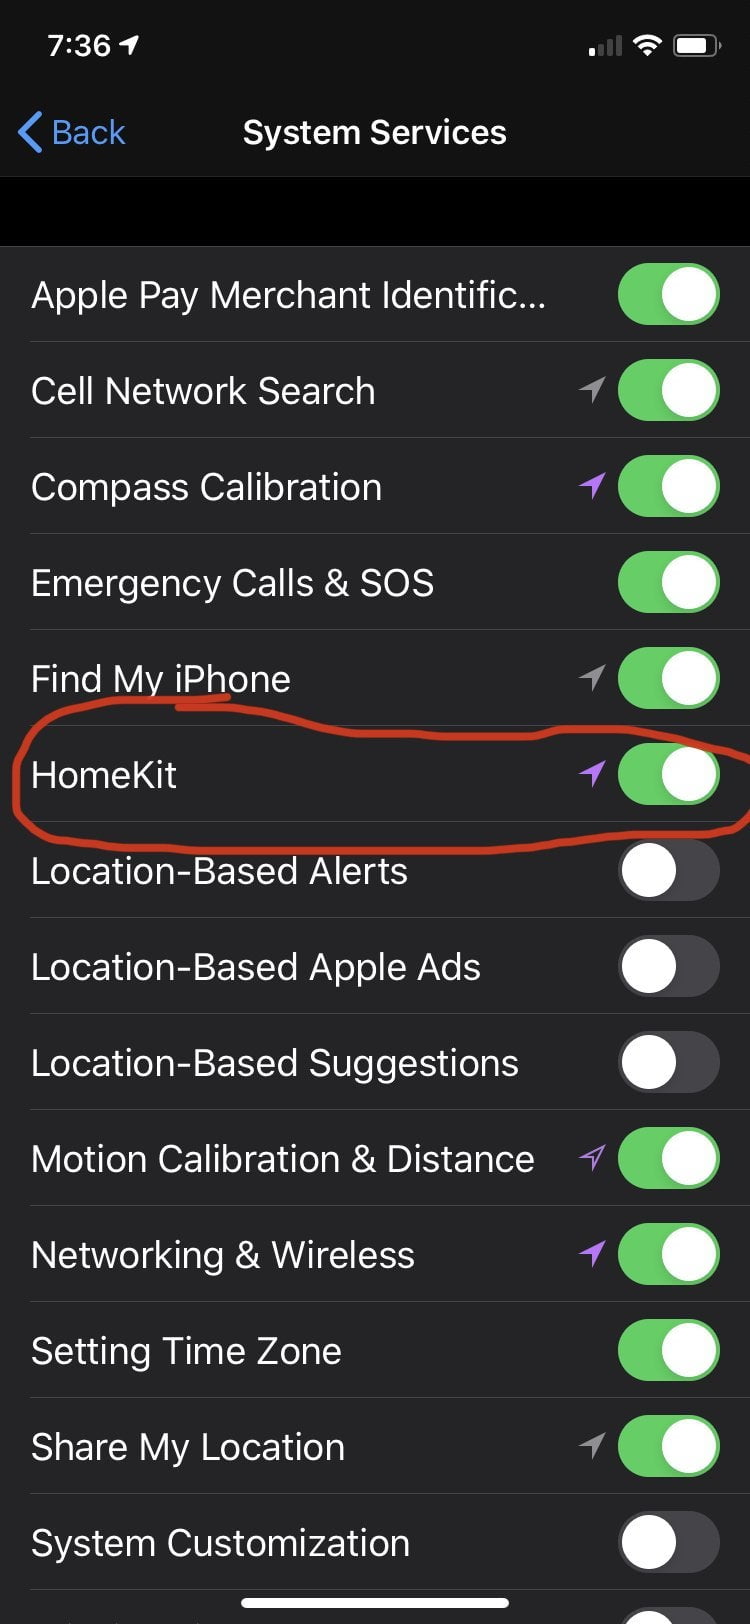 HomeKit arrival automation has been resolved